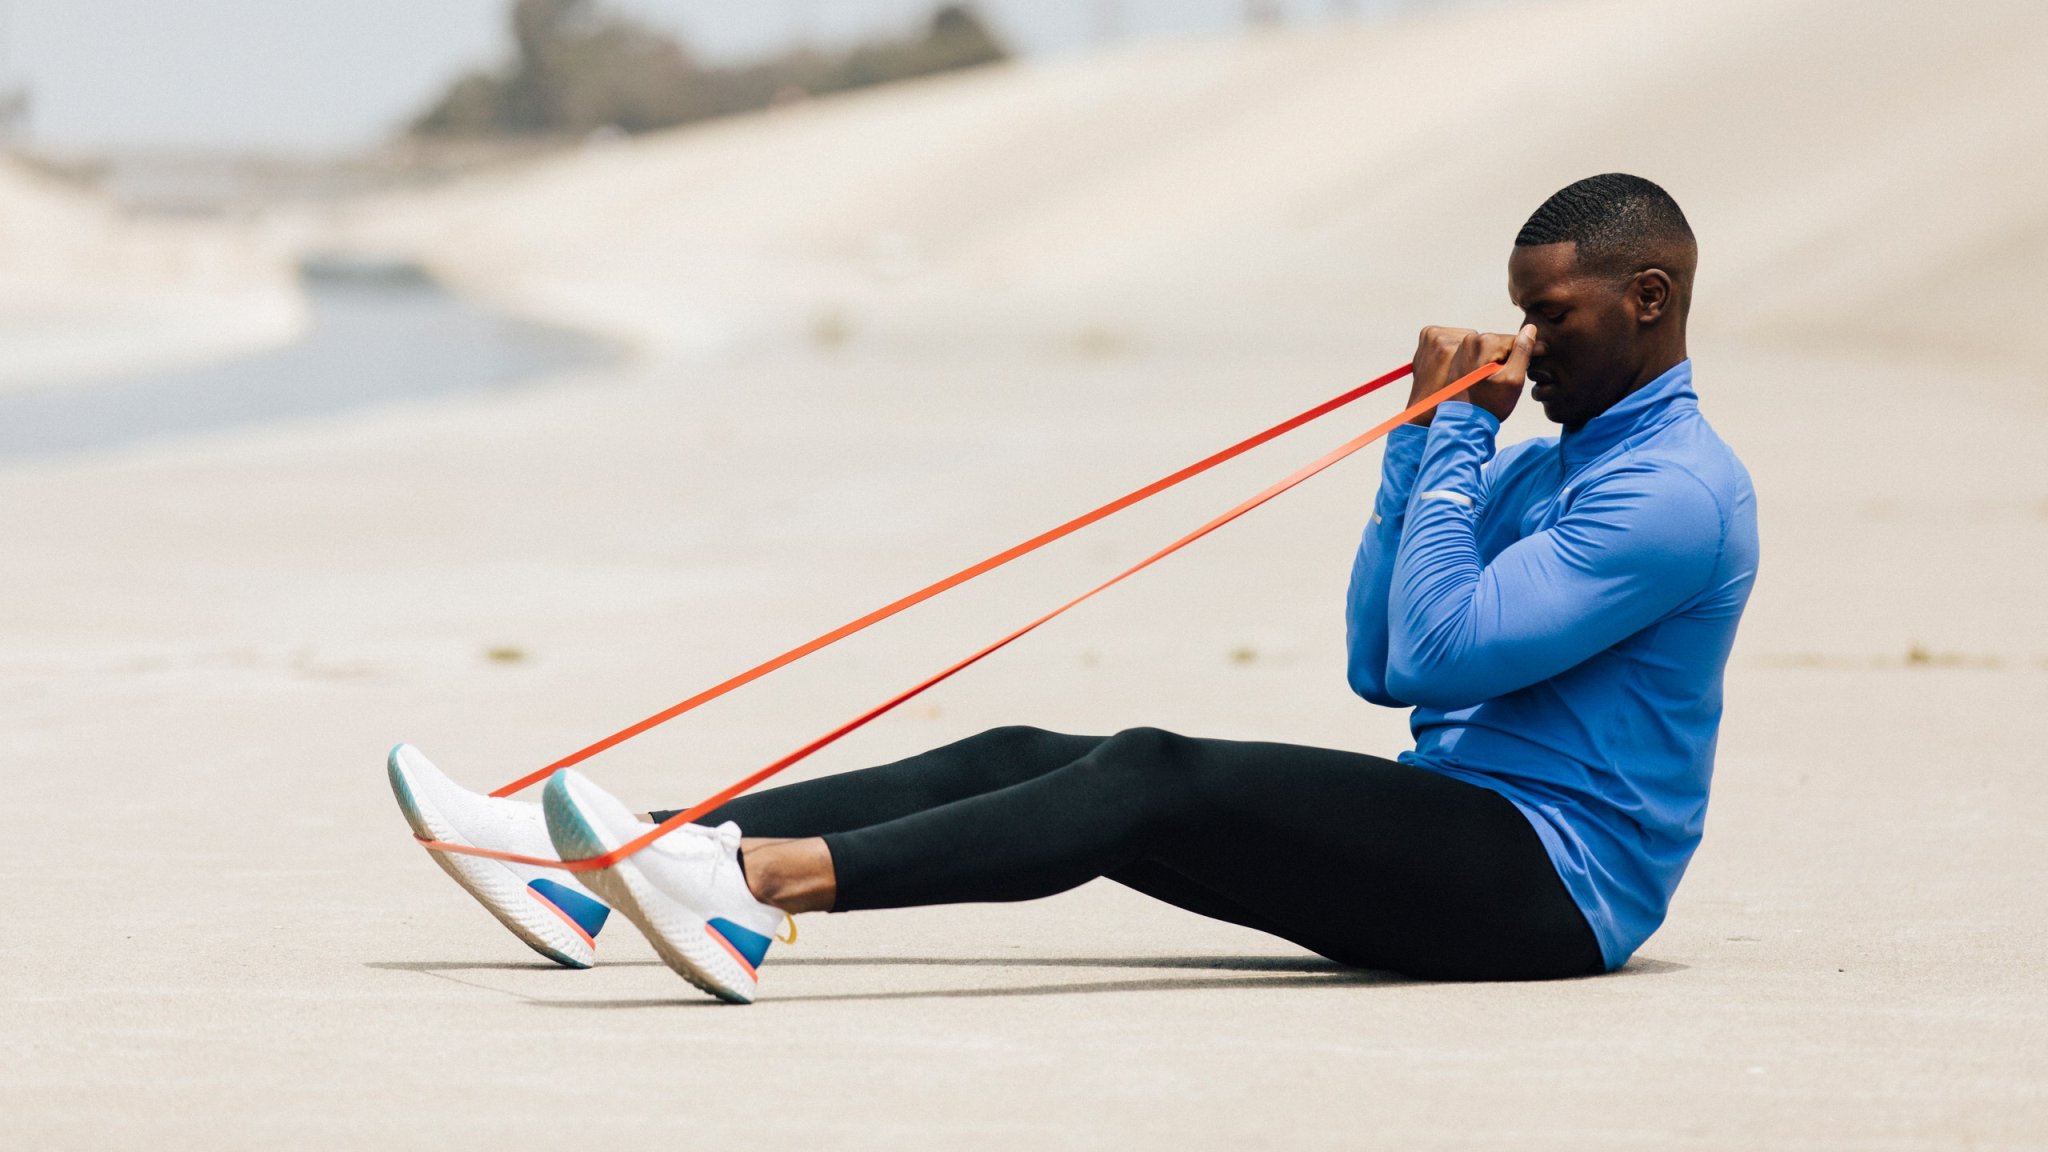 You Can Get a Killer Full-Body Strength Workout With Just Resistance Bands